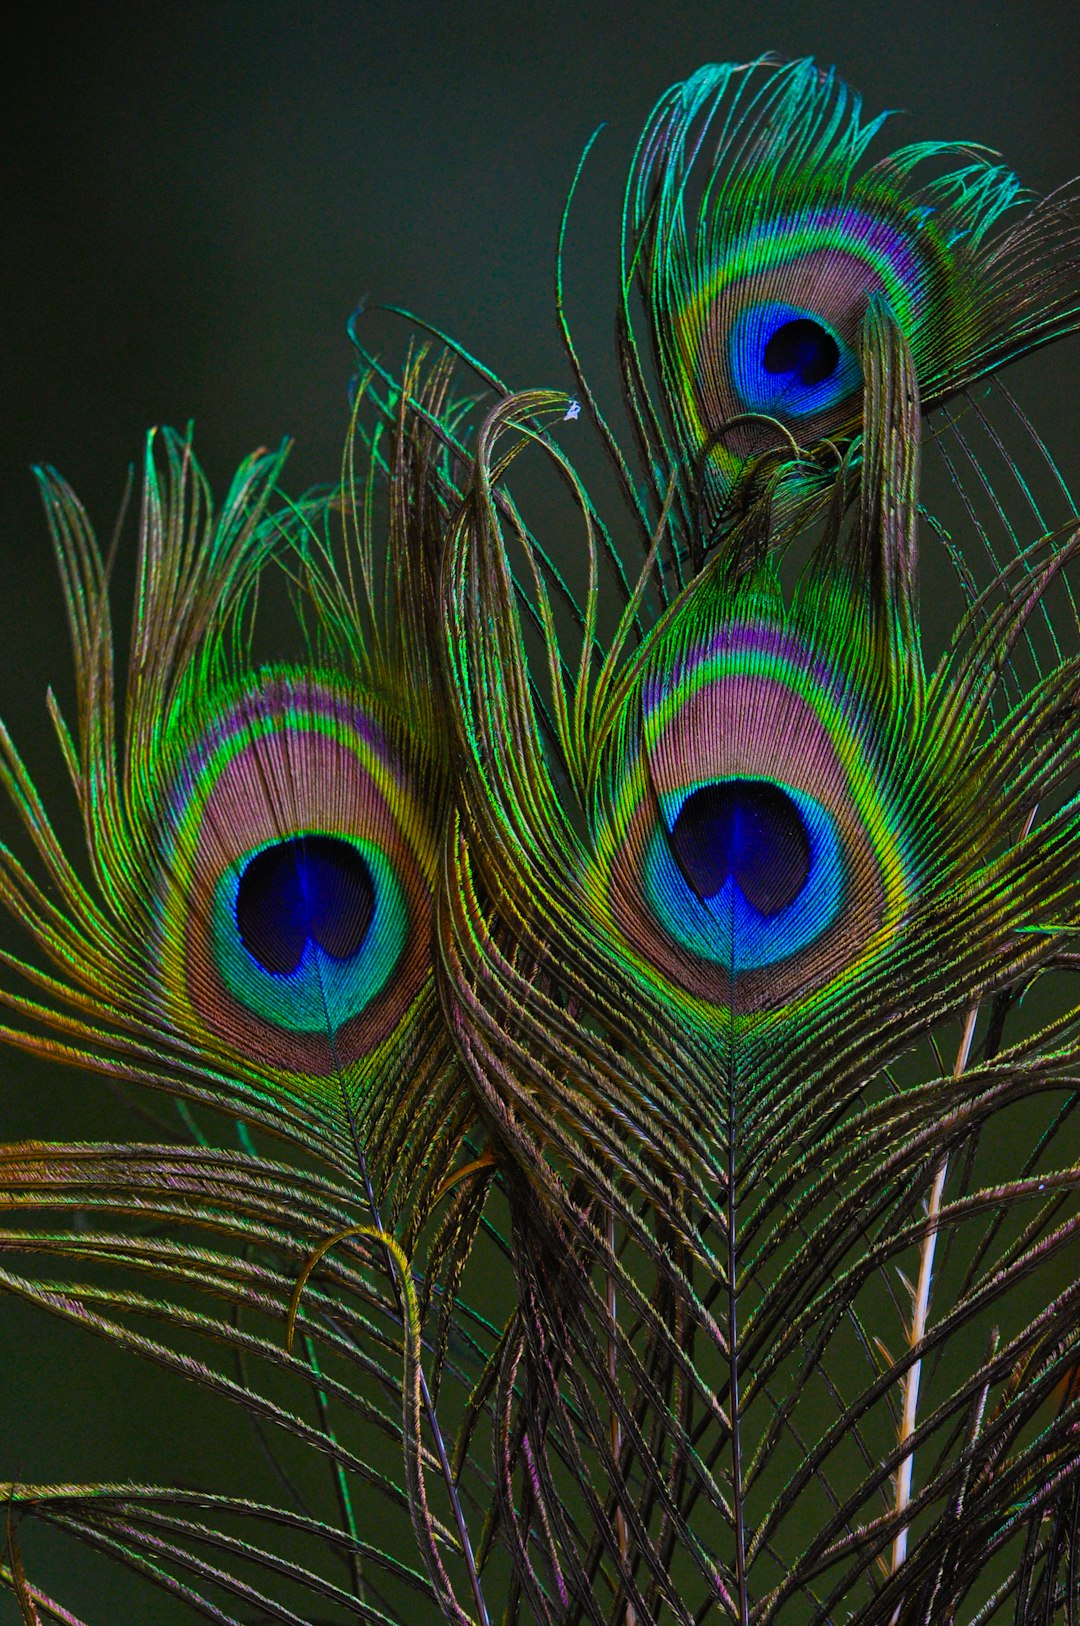  peacock feather in close up photography peacock